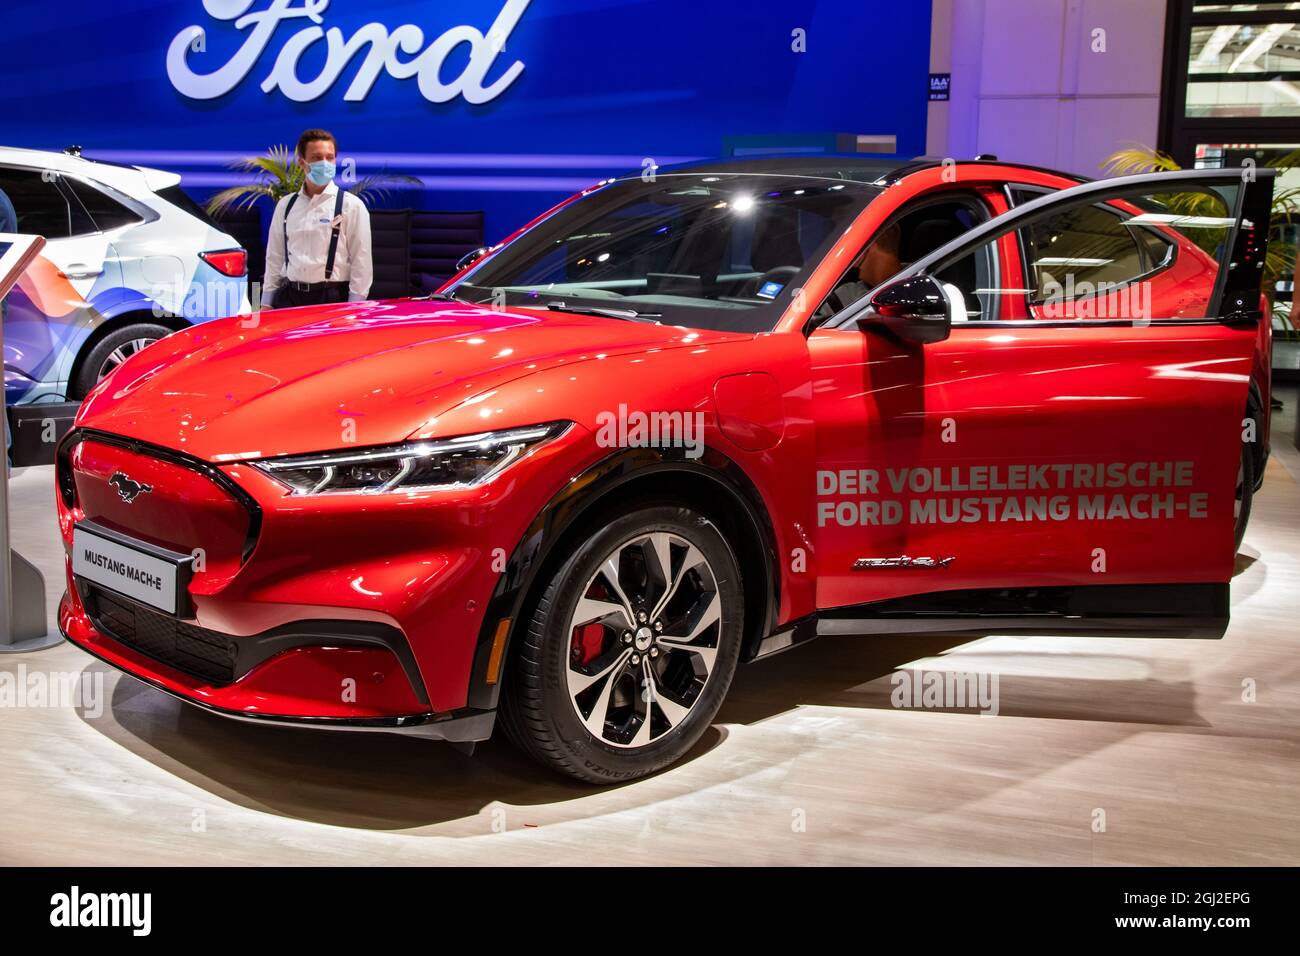 Ford Mustang Mach E Gt Electric Suv Car Showcased At The Iaa Mobility 21 Motor Show In Munich Germany September 6 21 Stock Photo Alamy